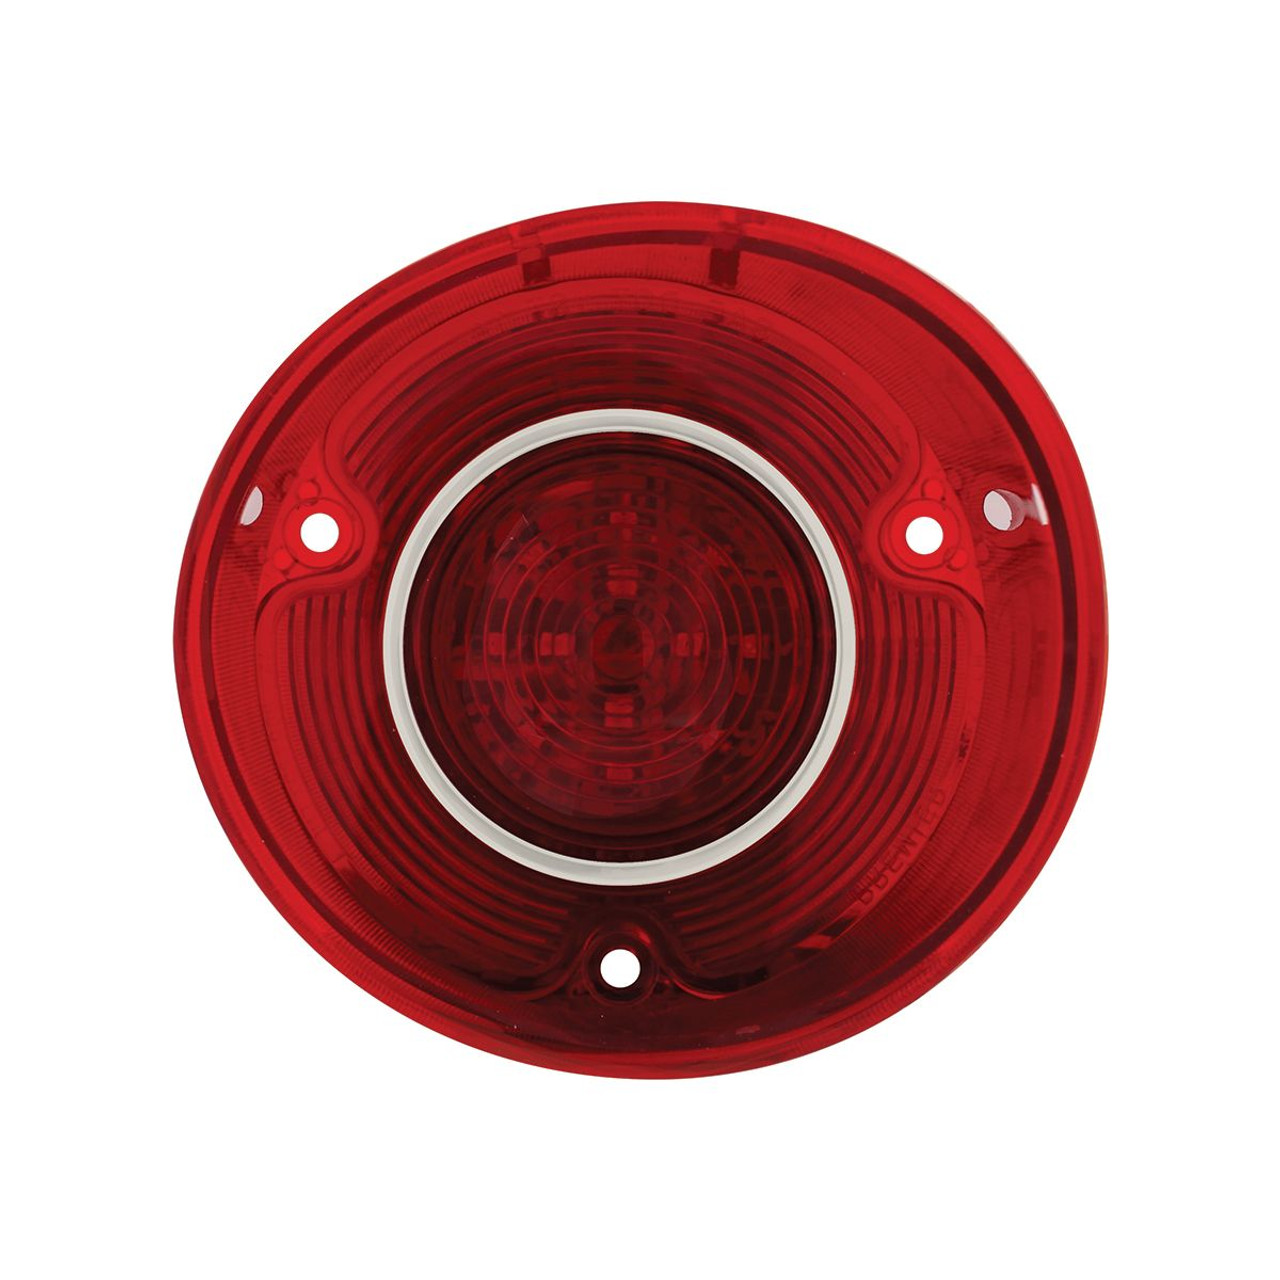 United Pacific 42 LED Tail Light Lens W/Stainless Steel Trim For 1972 Chevelle SS & Malibu - R/H